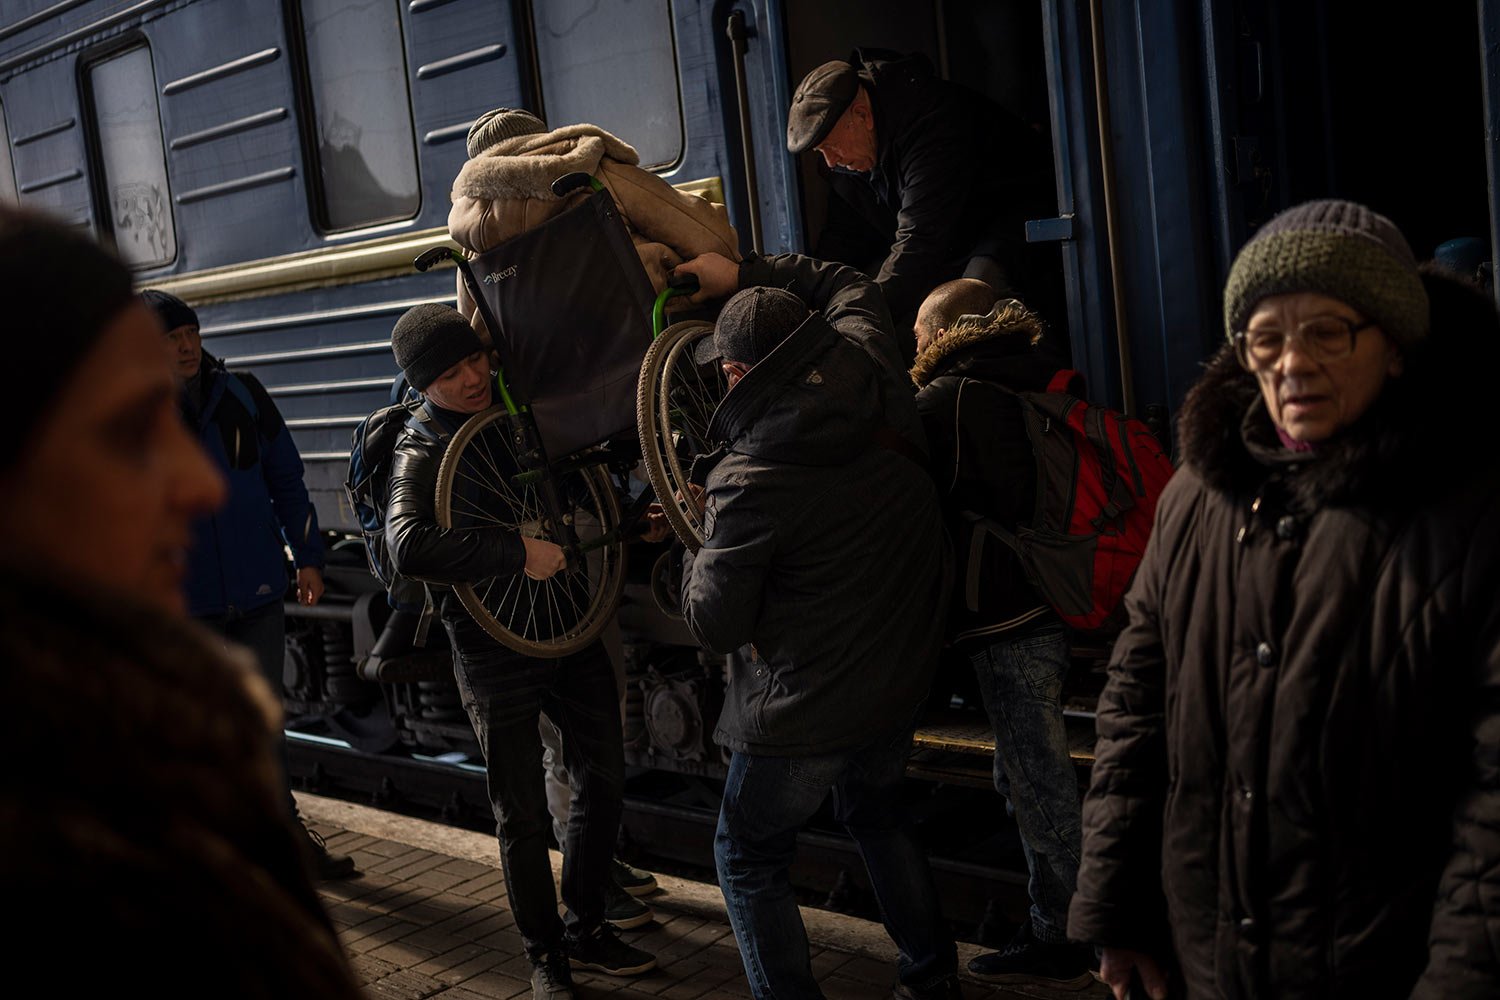  Ukrainians escaping from the besieged city of Mariupol along with other passengers from Zaporizhzhia arrive at Lviv, western Ukraine, on Sunday, March 20, 2022. (AP Photo/Bernat Armangue) 